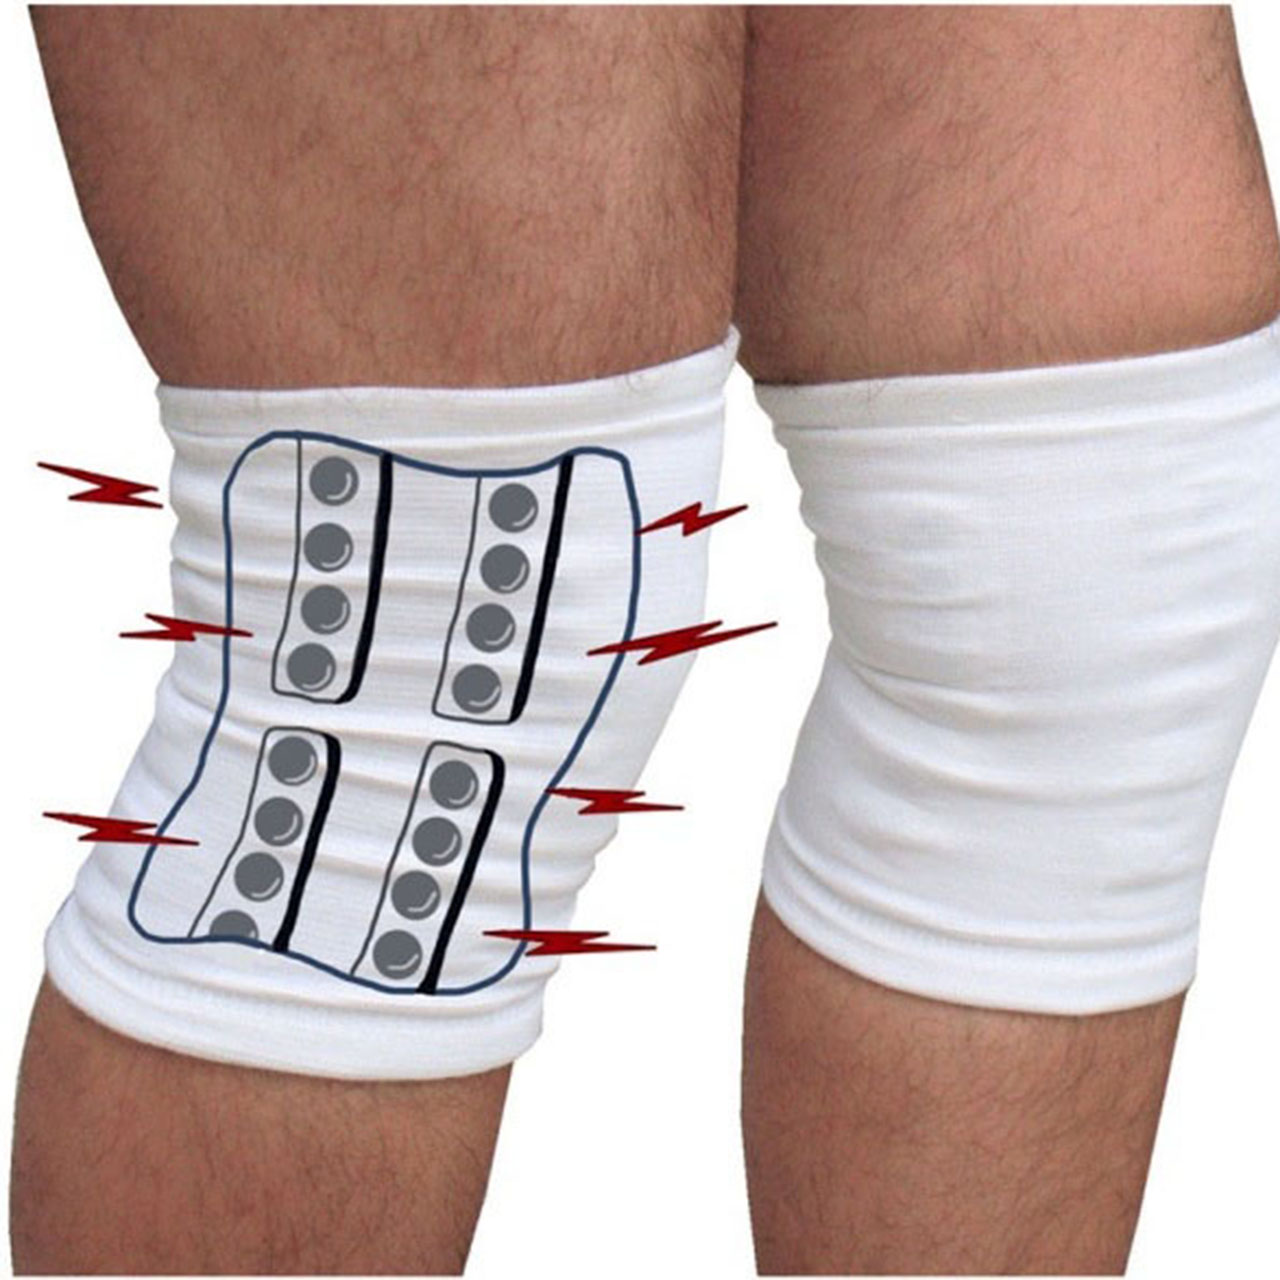 Magnetic Knee Supports - Set of 2